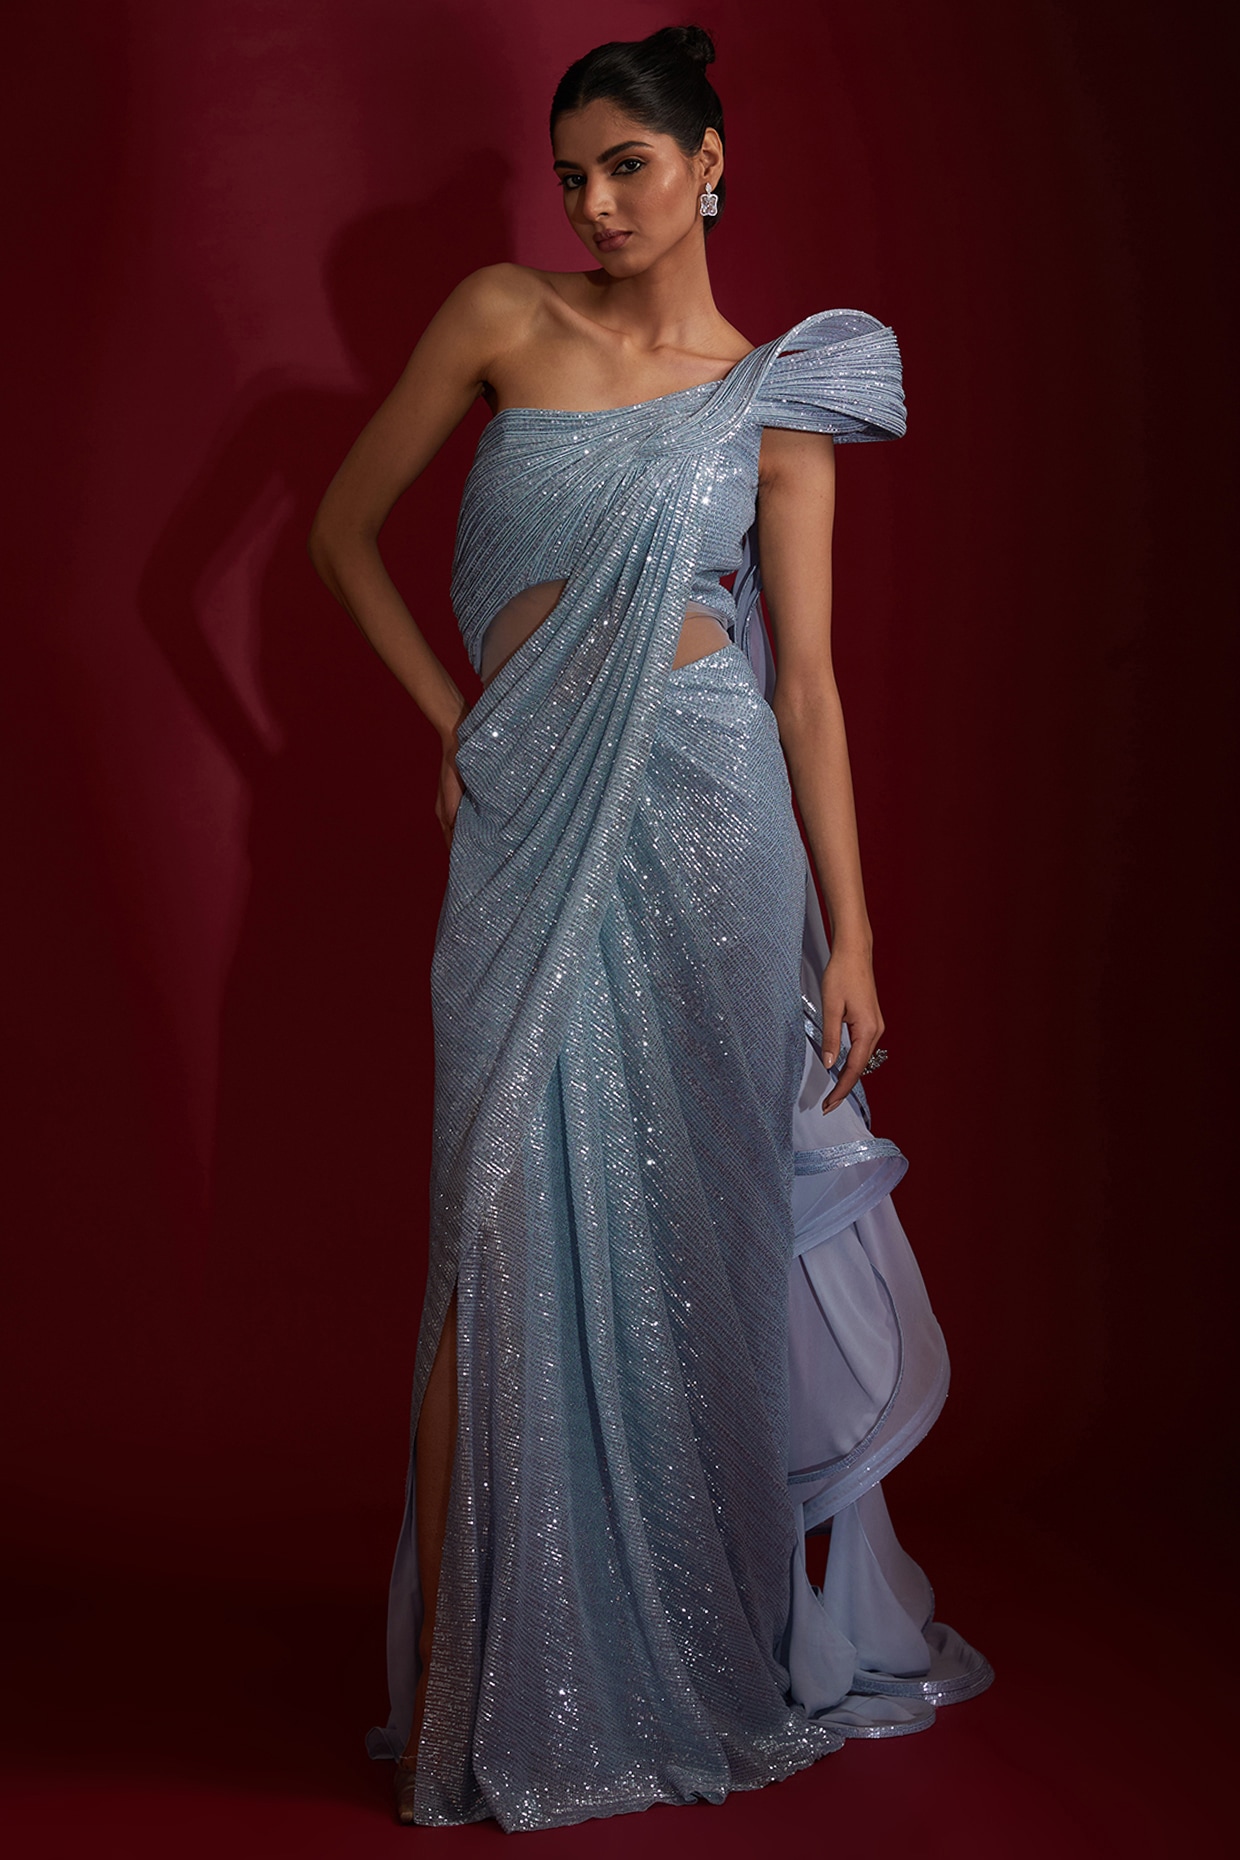 Saree Series 𝐅𝐞𝐬𝐭𝐢𝐯𝐞 𝐑𝐨𝐦𝐚𝐧𝐜𝐞 Opt for high-octane glamour with  our ready to ship collection featuring cocktail gowns, dresses… | Instagram